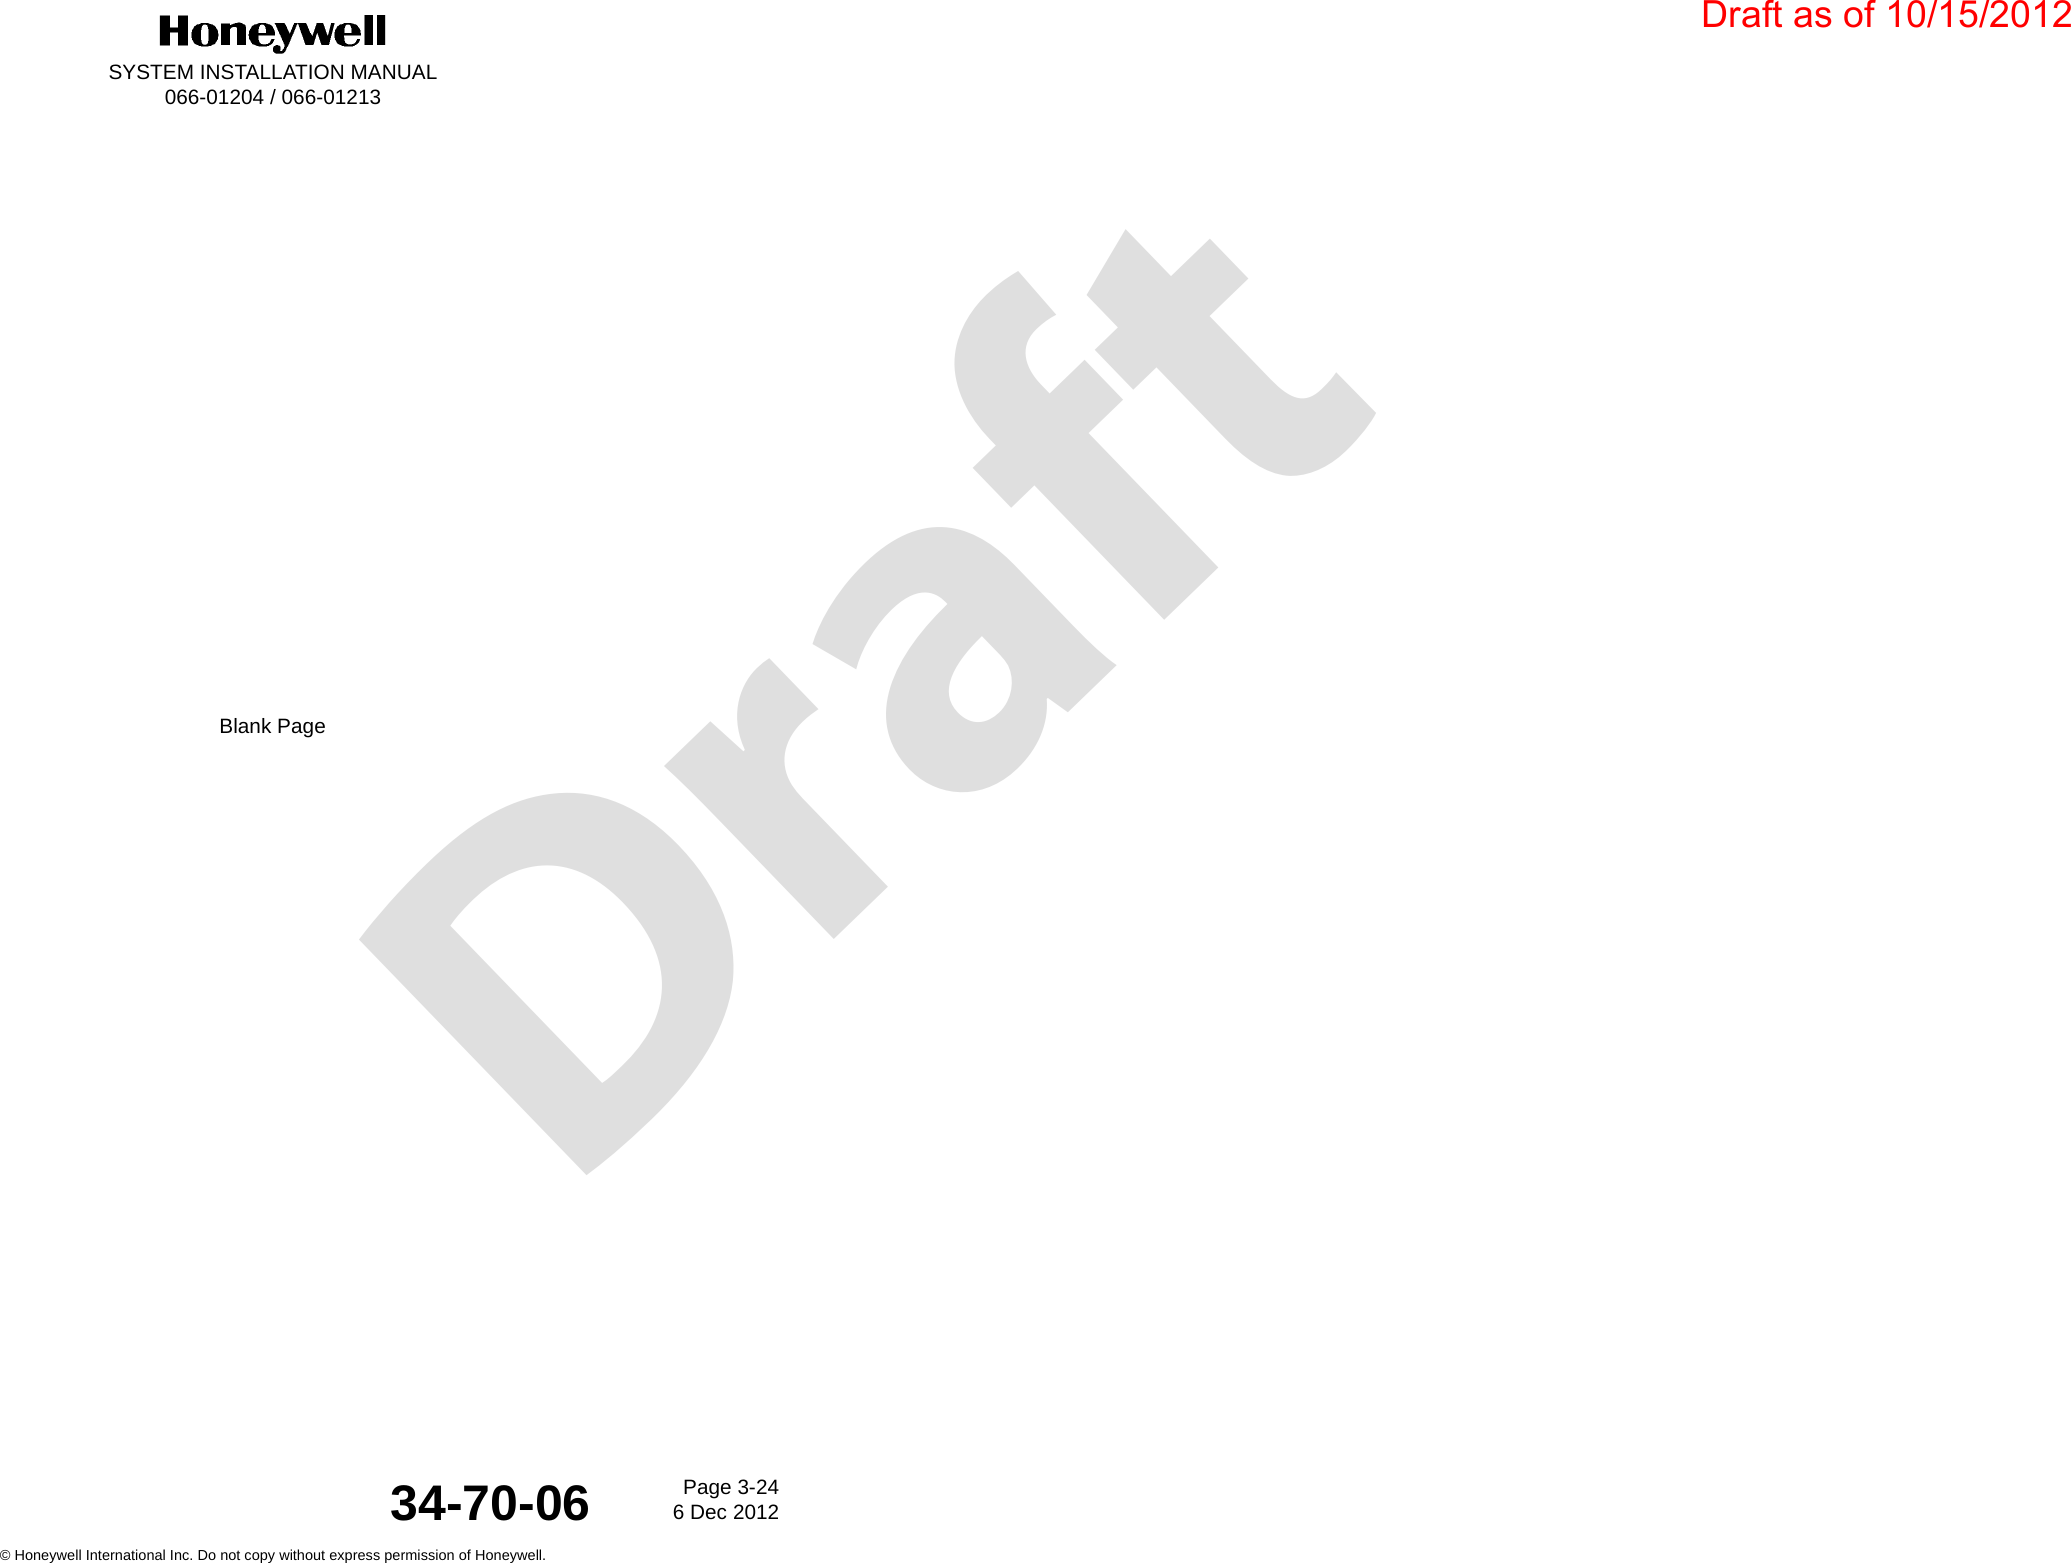 DraftSYSTEM INSTALLATION MANUAL066-01204 / 066-01213Page 3-246 Dec 2012© Honeywell International Inc. Do not copy without express permission of Honeywell.34-70-06Blank PageDraft as of 10/15/2012